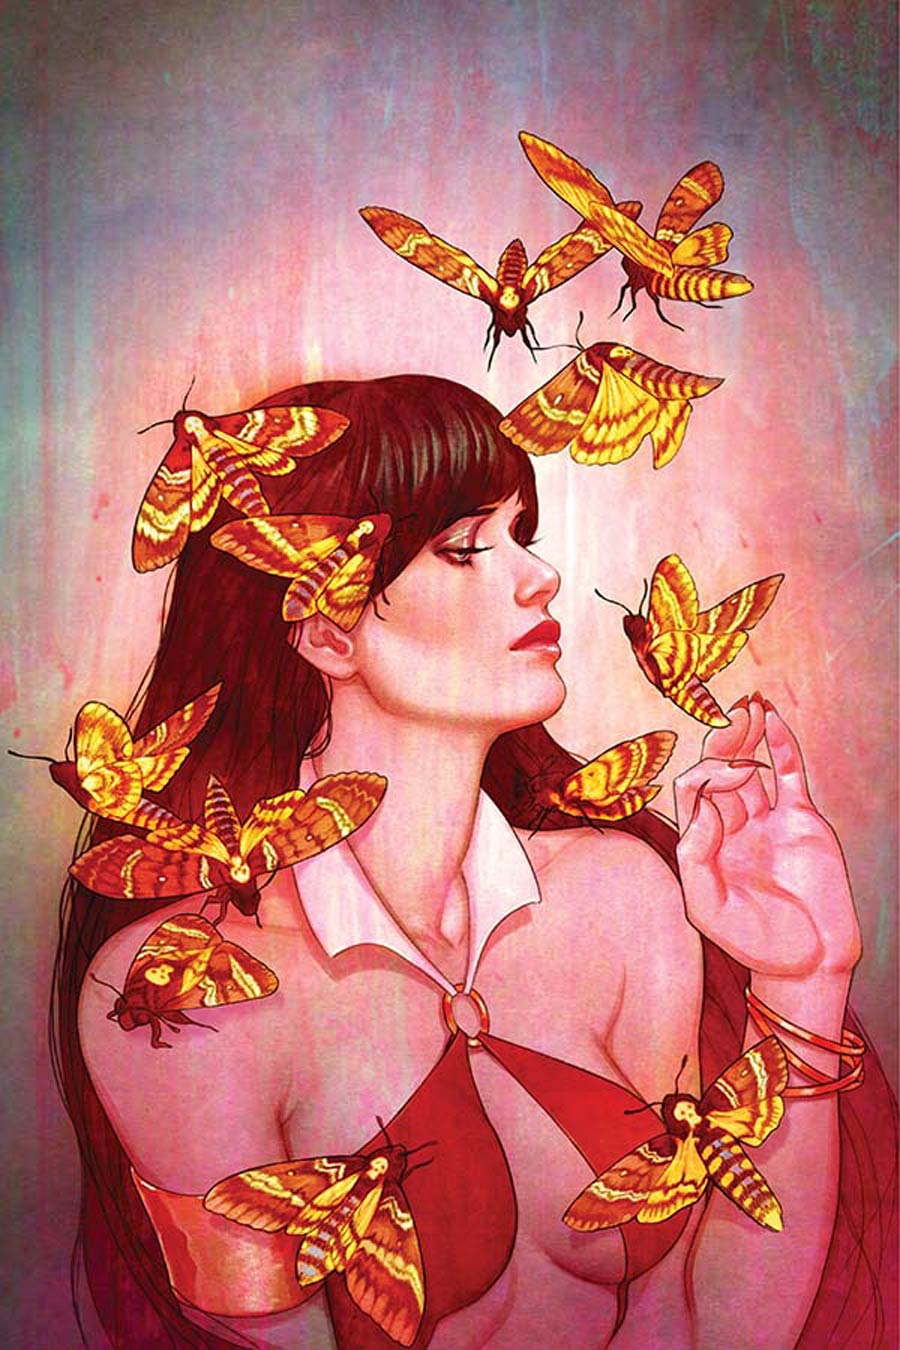 Vampirella Vol 5 #3 Cover E High-End Jenny Frison Virgin Art Ultra-Limited Variant Cover (ONLY 25 COPIES IN EXISTENCE!)